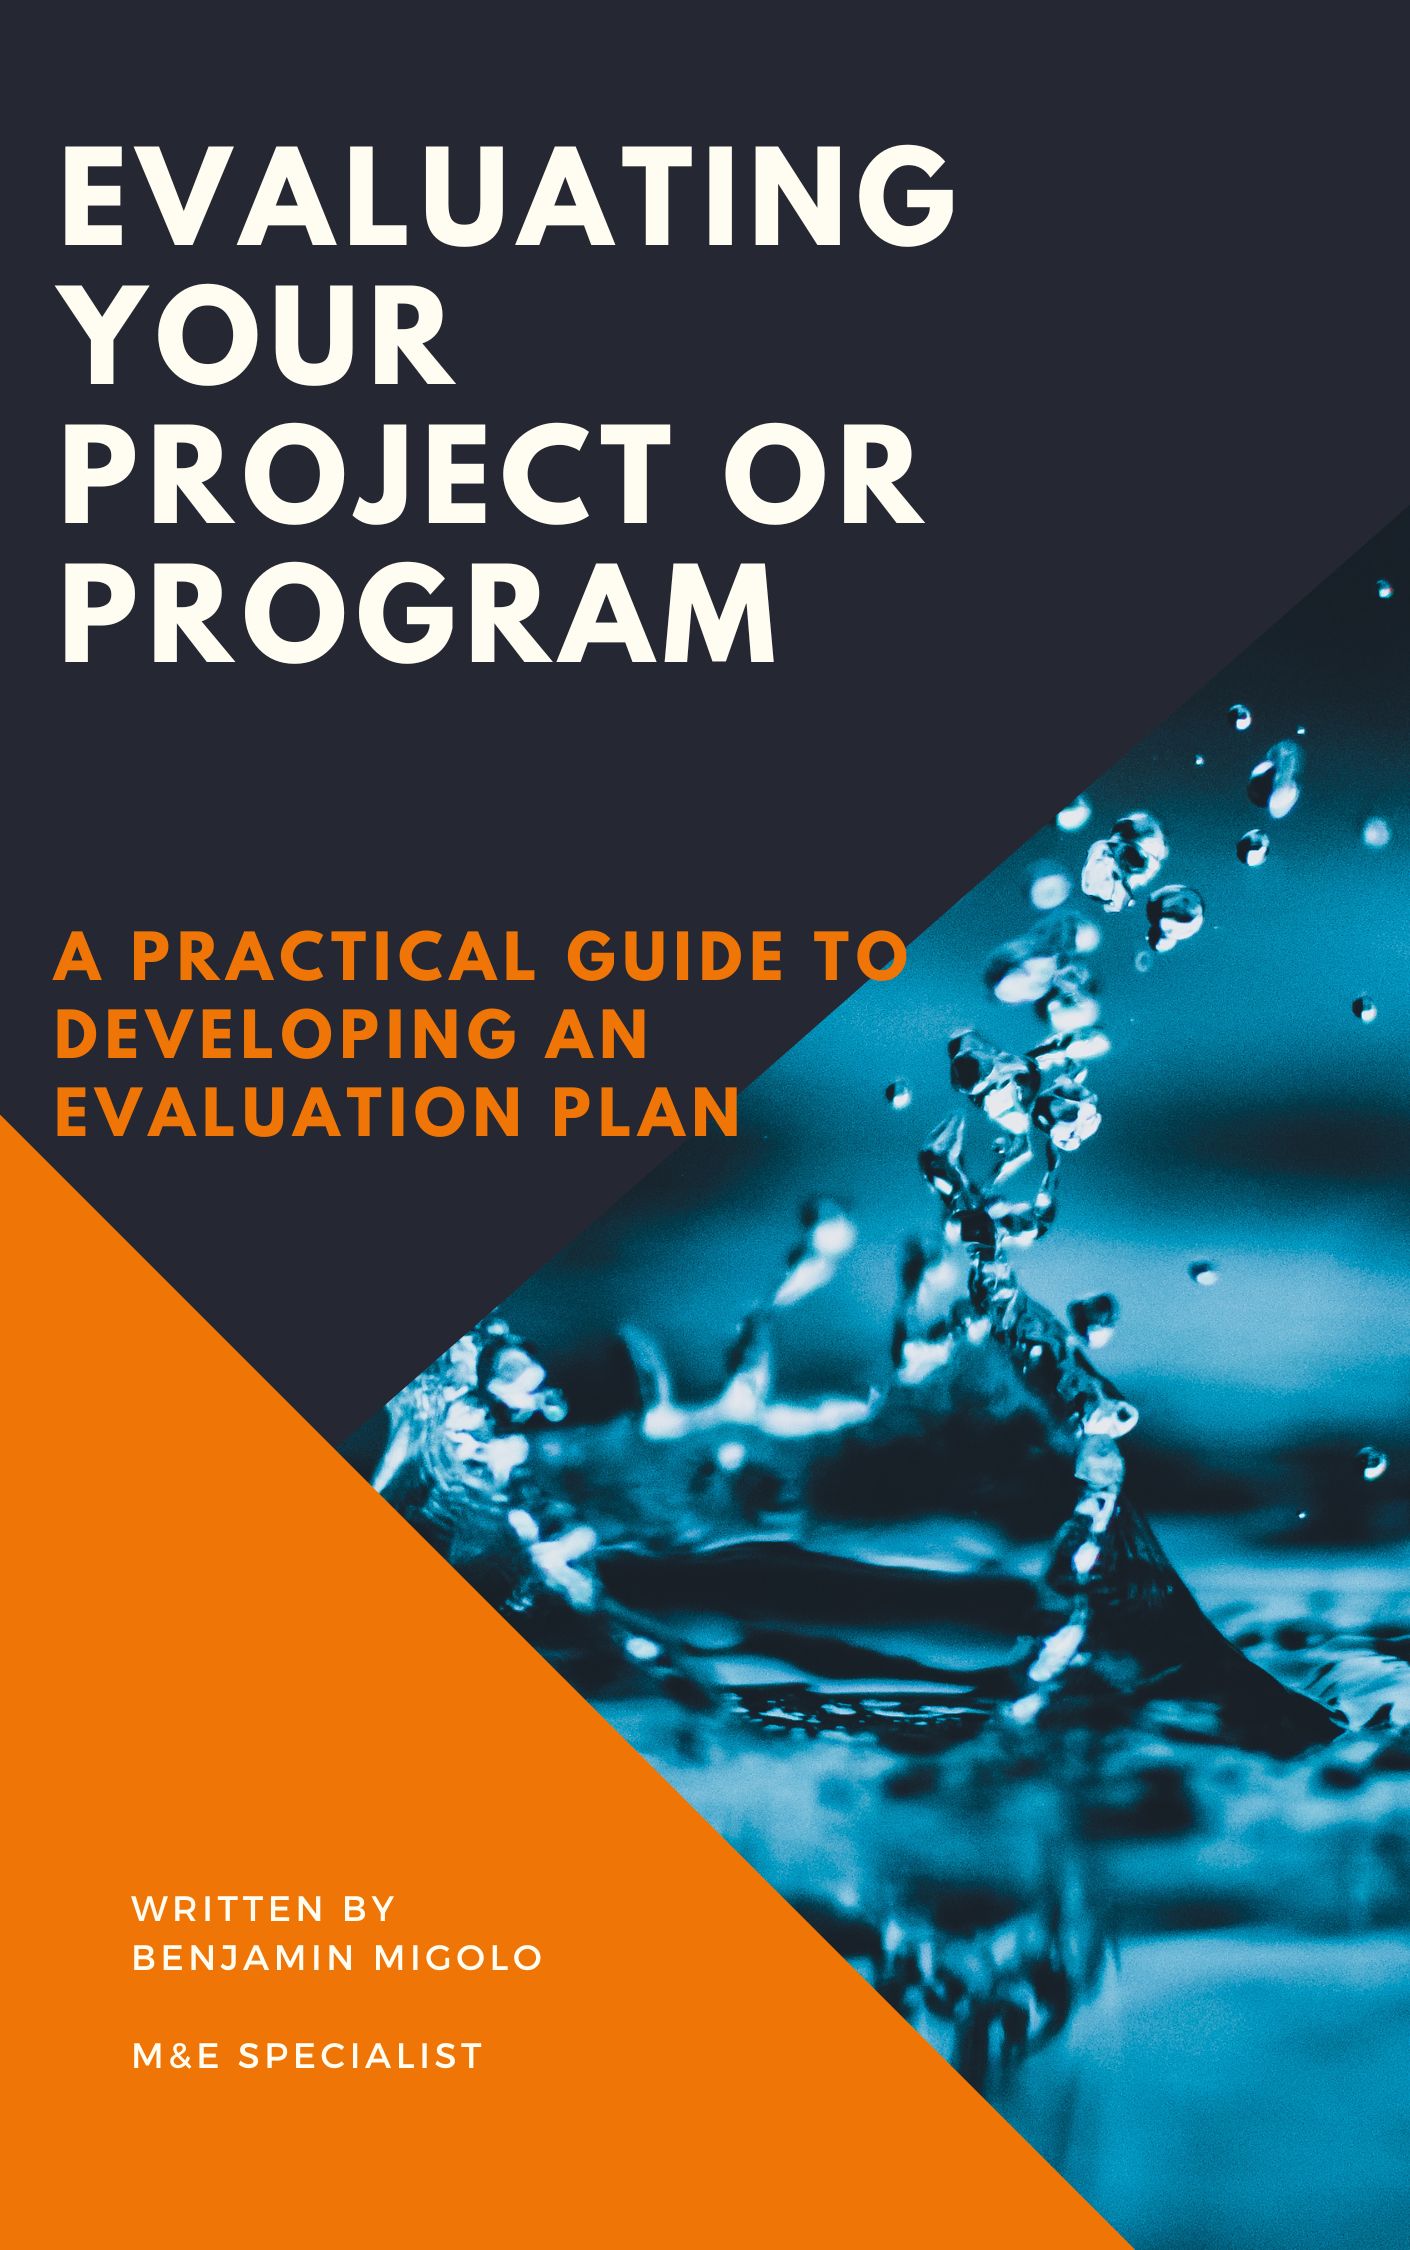 A Pratical Guide to Developing an Evaluation Plan